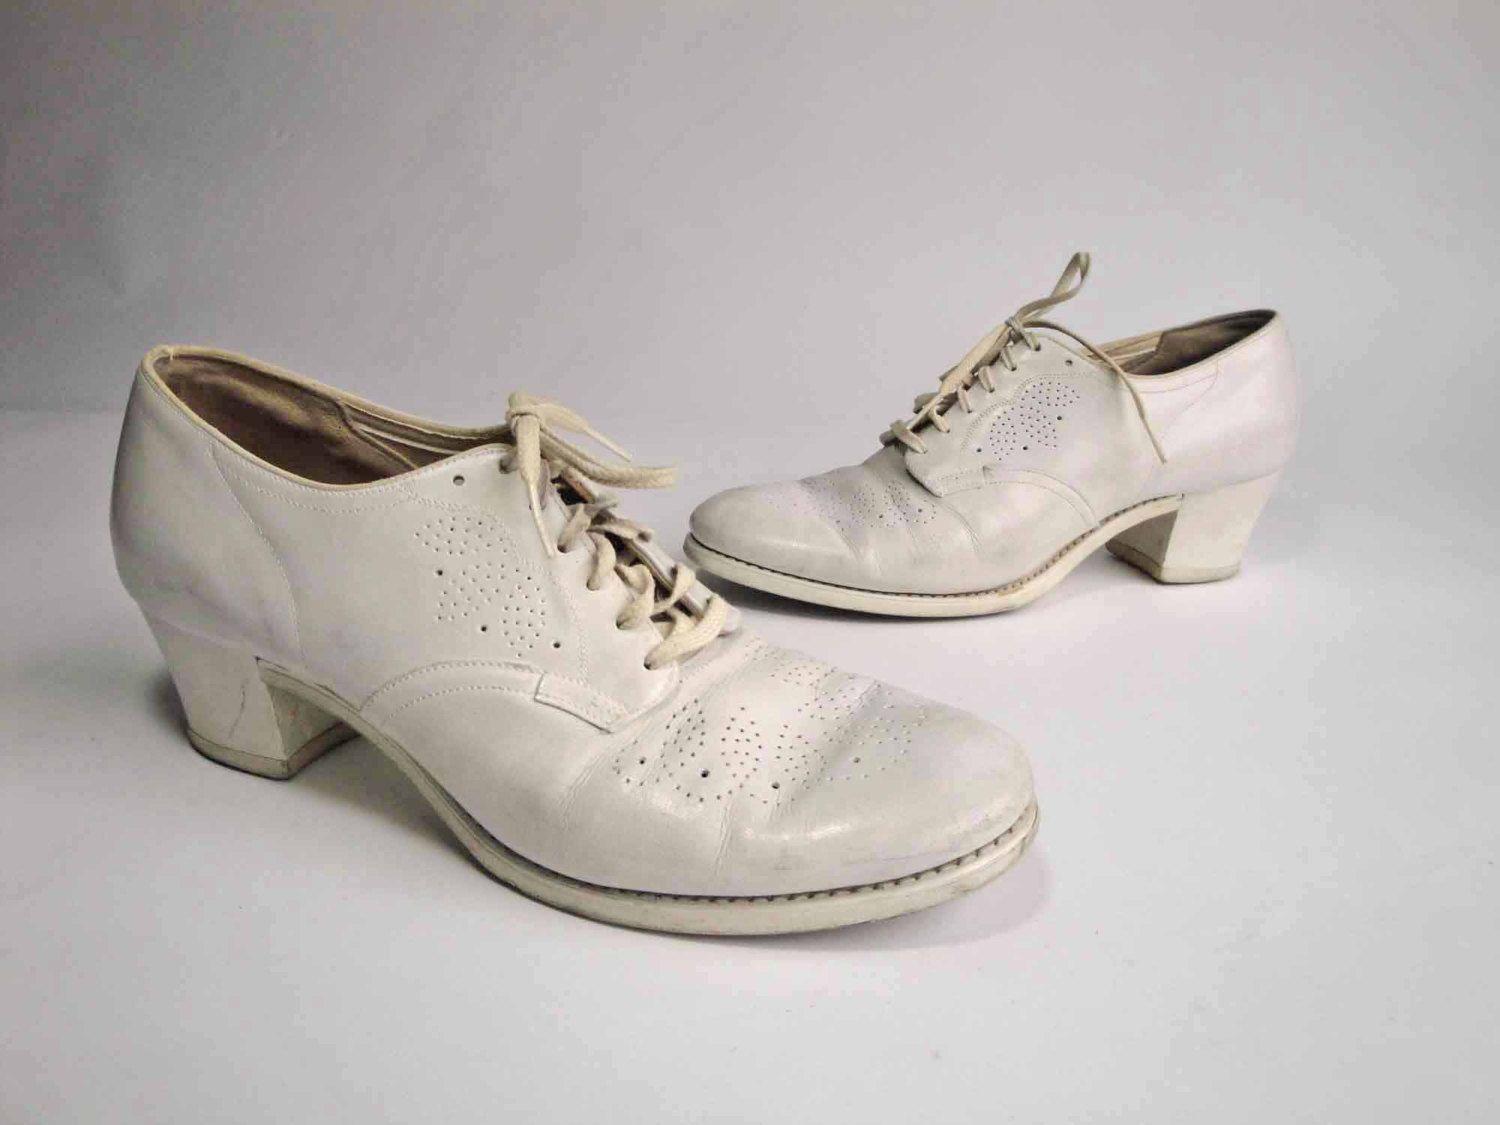 Red Cross Shoe Logo - Vintage 1940s Shoes // The Oh Nurse White Perforated Oxford Red